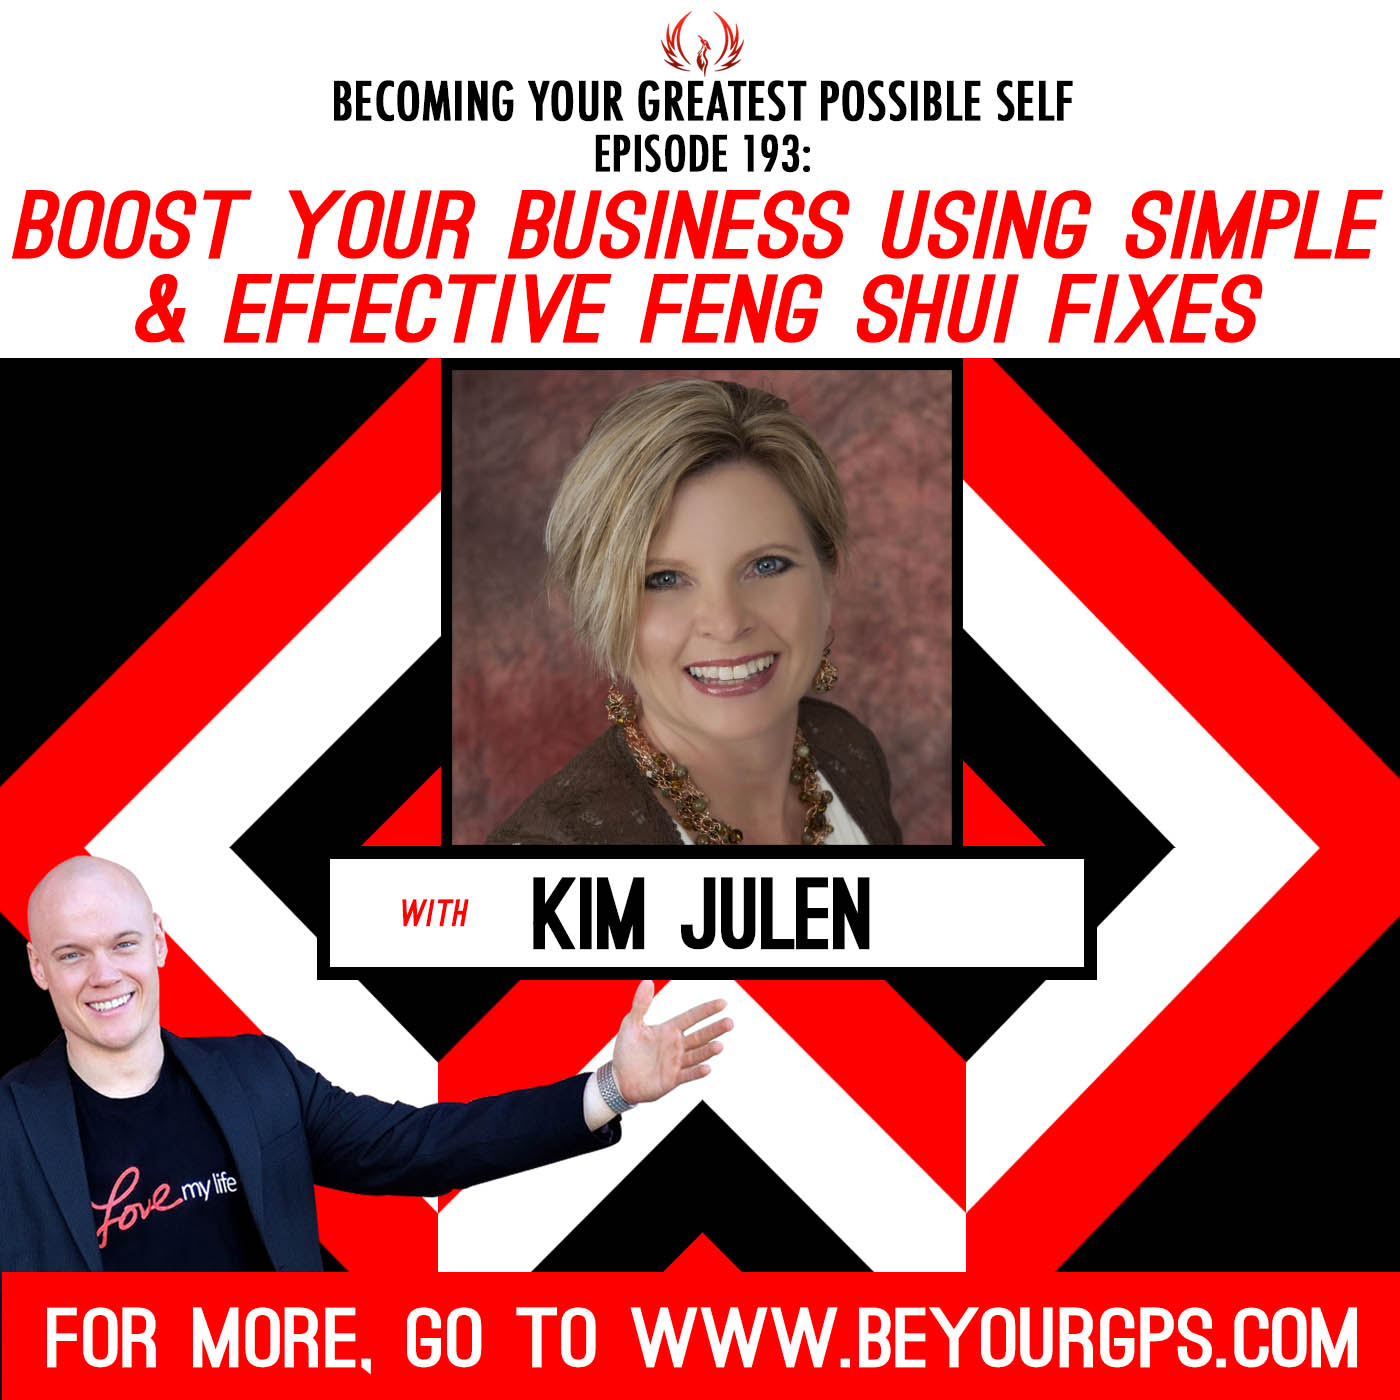 Boost Your Business Using Simple & Effective Feng Shui Fixes with Kim Julen